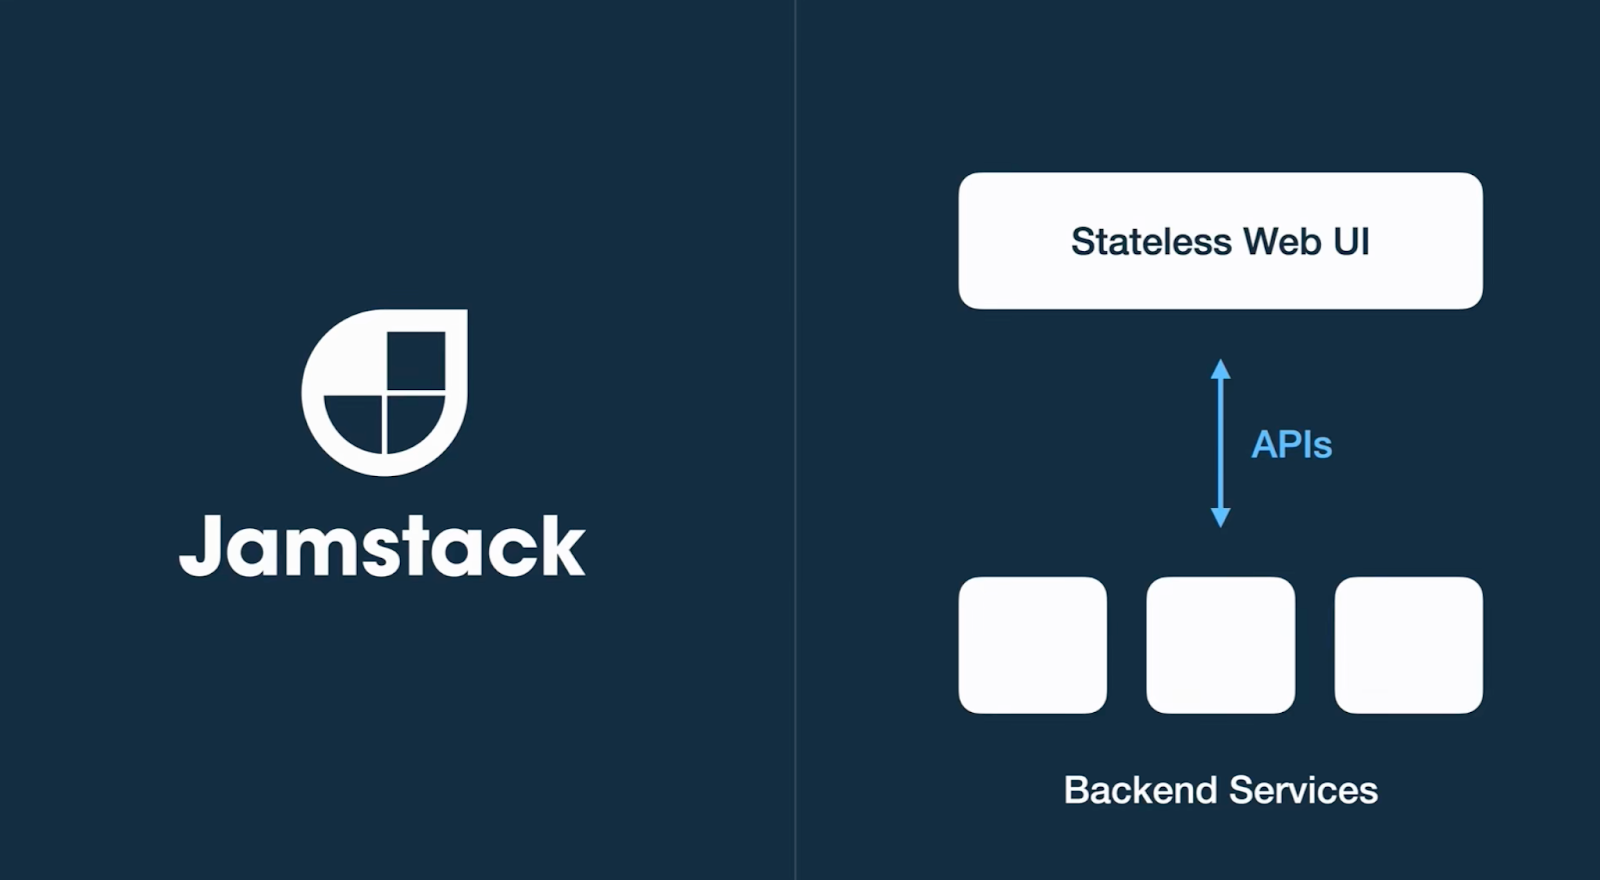 The Jamstack approach to web architecture, stateless web UI, and APIs to backend services.